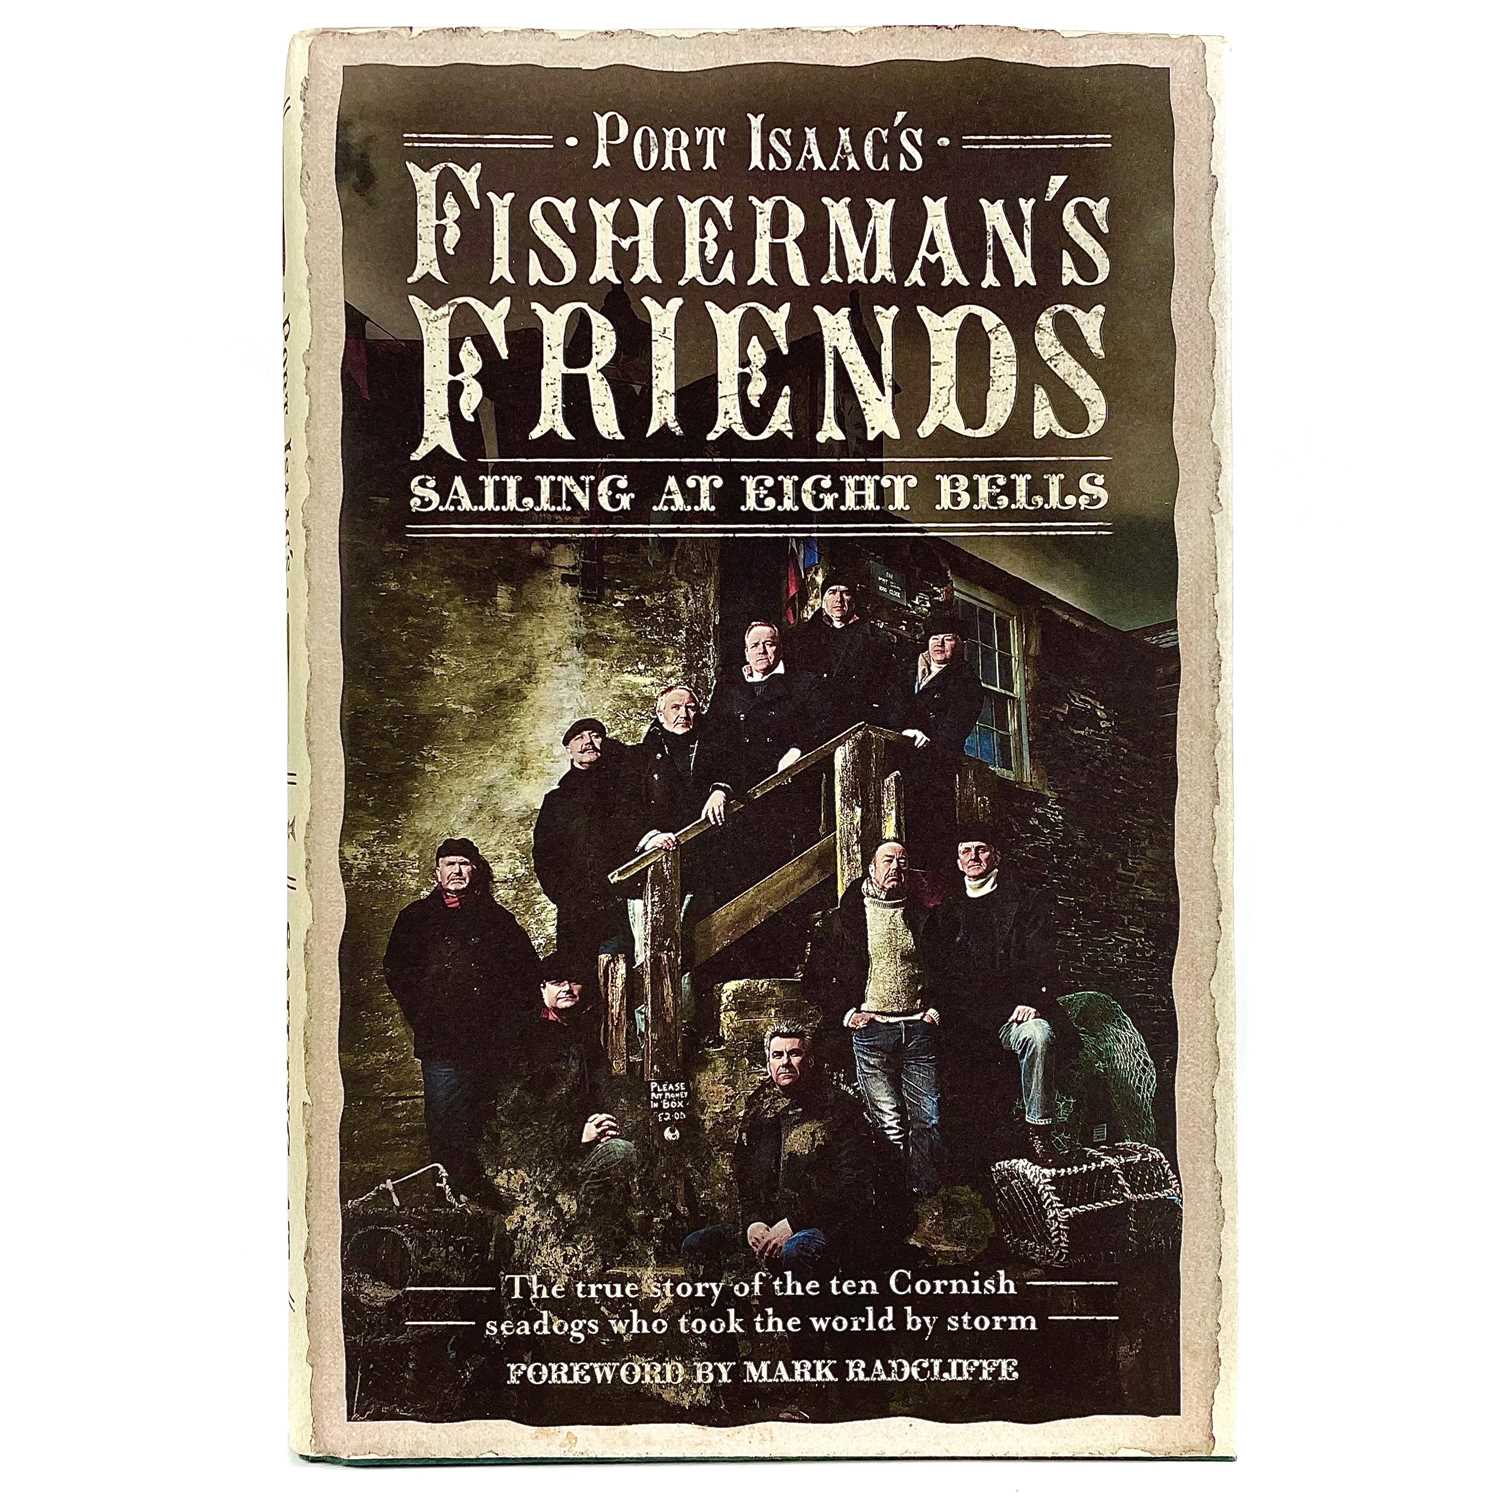 A signed 'Port Isaac's Fishermans Friends Sailing at Eight Bells'.